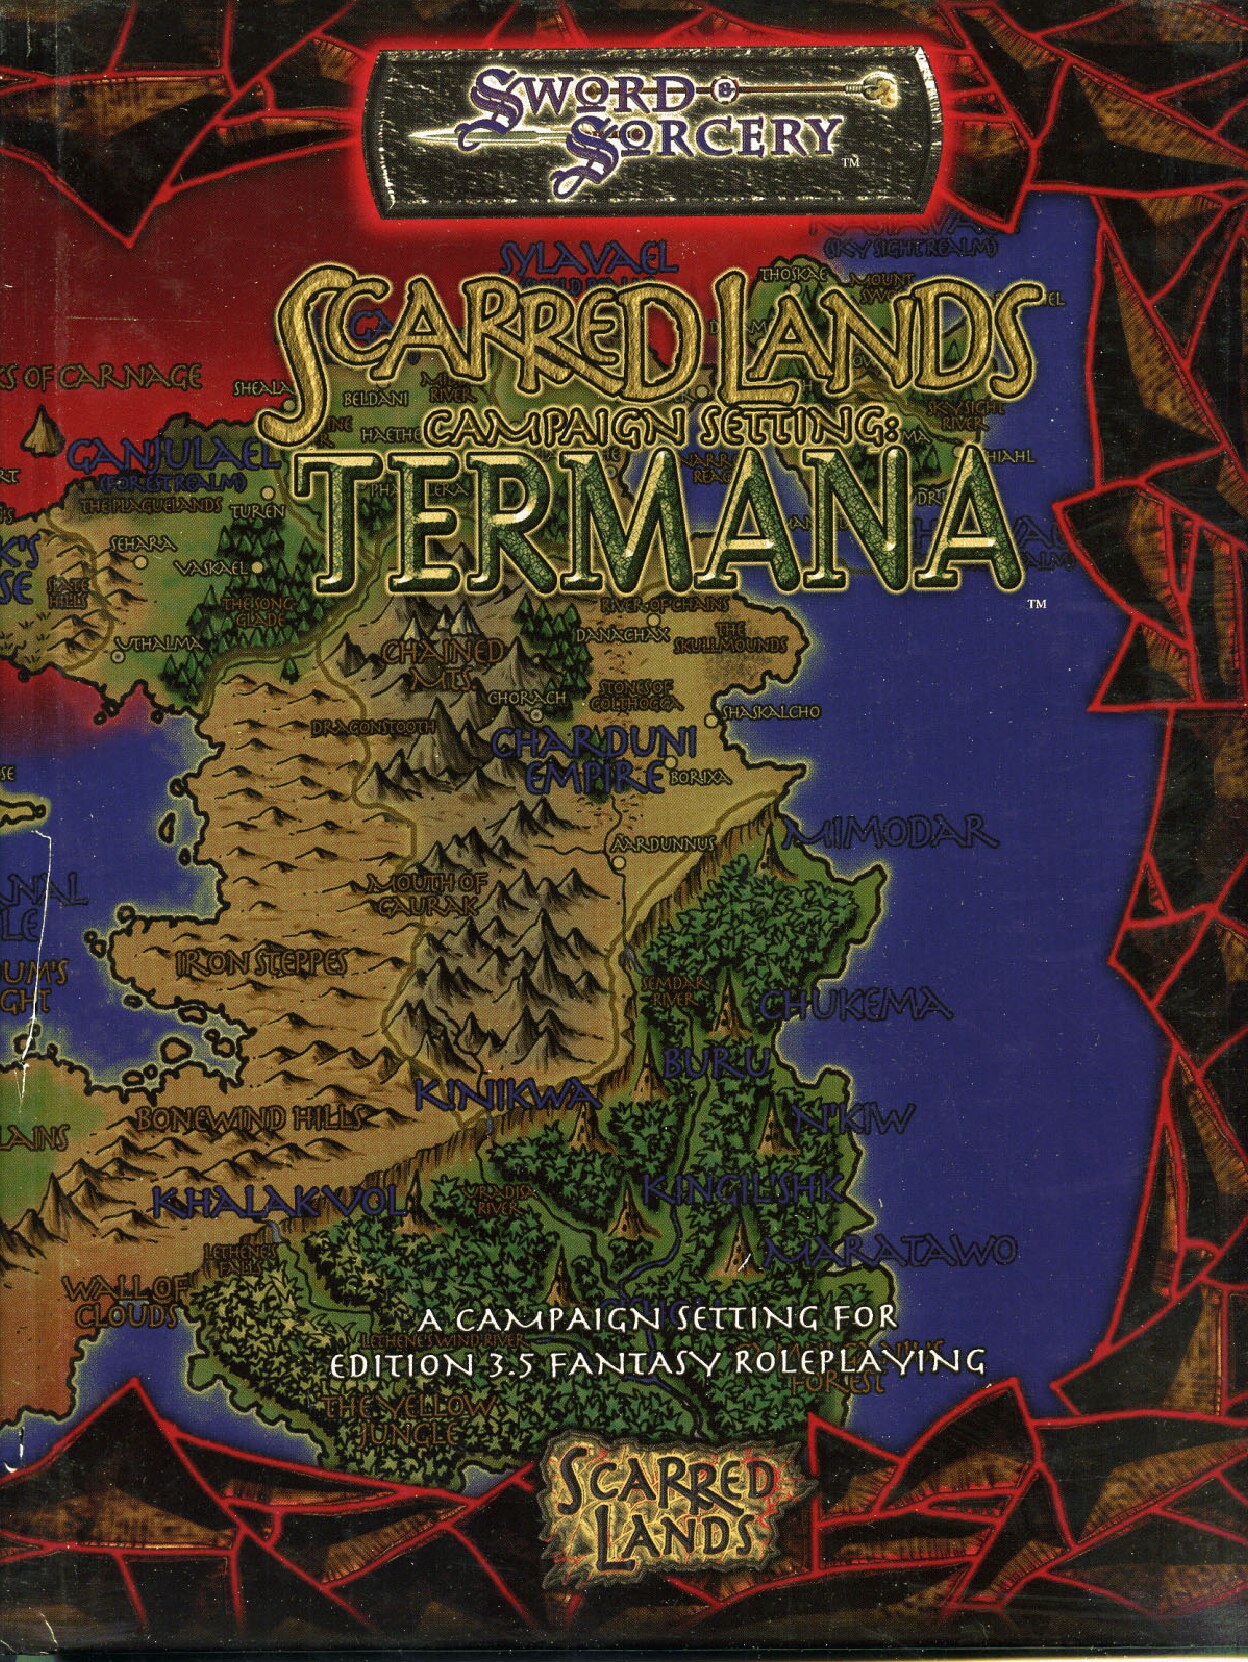 WW8341 Scarred Lands - Campaign Setting - Termana